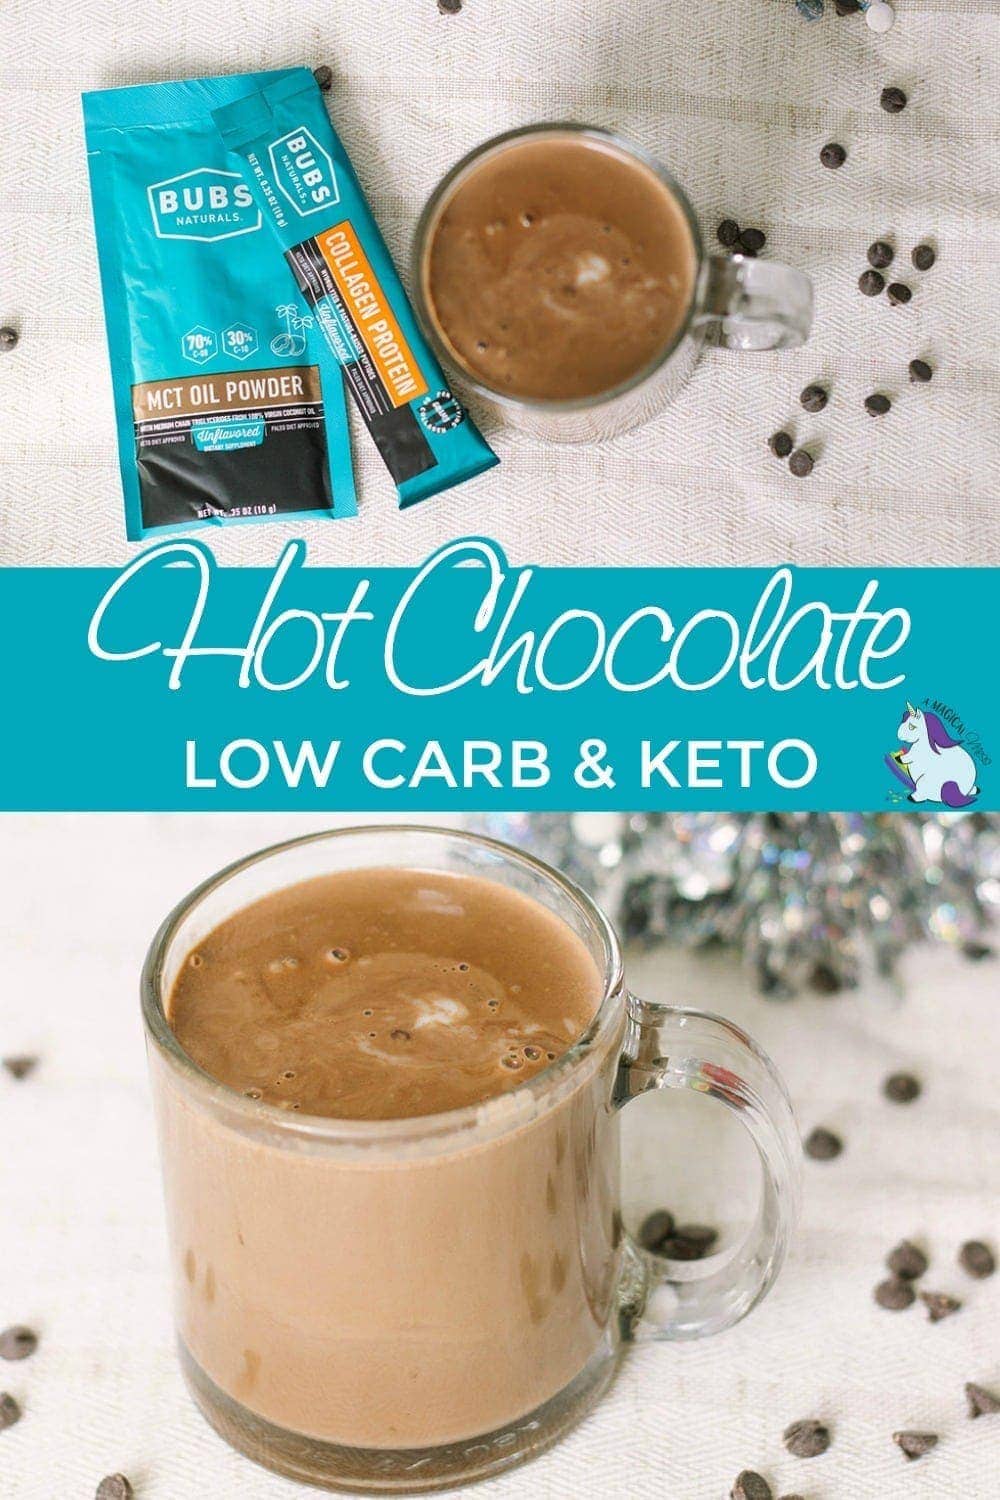 Keto friendly hot chocolate with BUBS Naturals products